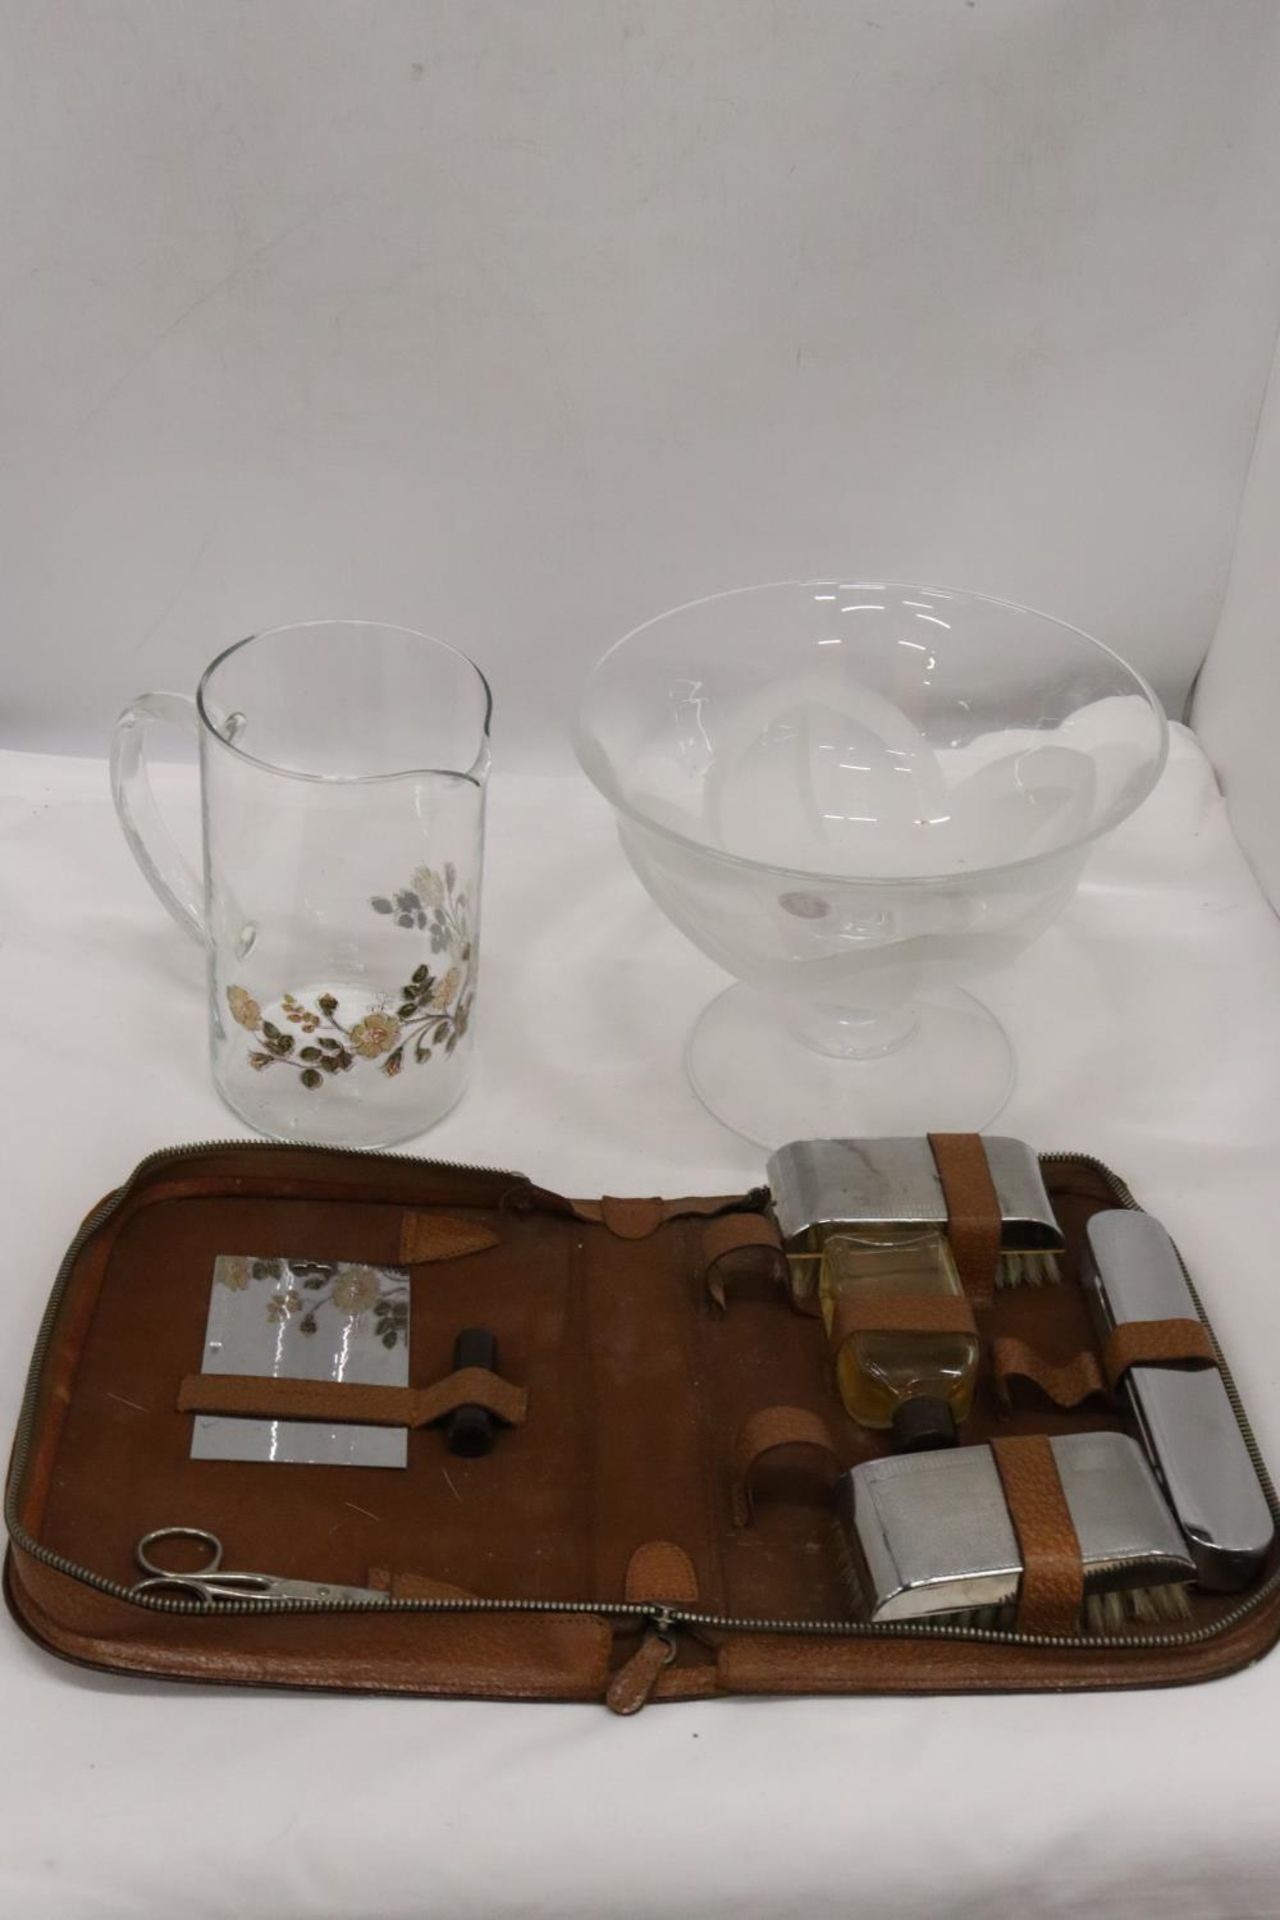 THREE ITEMS TO INCLUDE A GLASS BOWL, DECORATIVE GLASS JUG AND A GENTS TRAVEL CASE